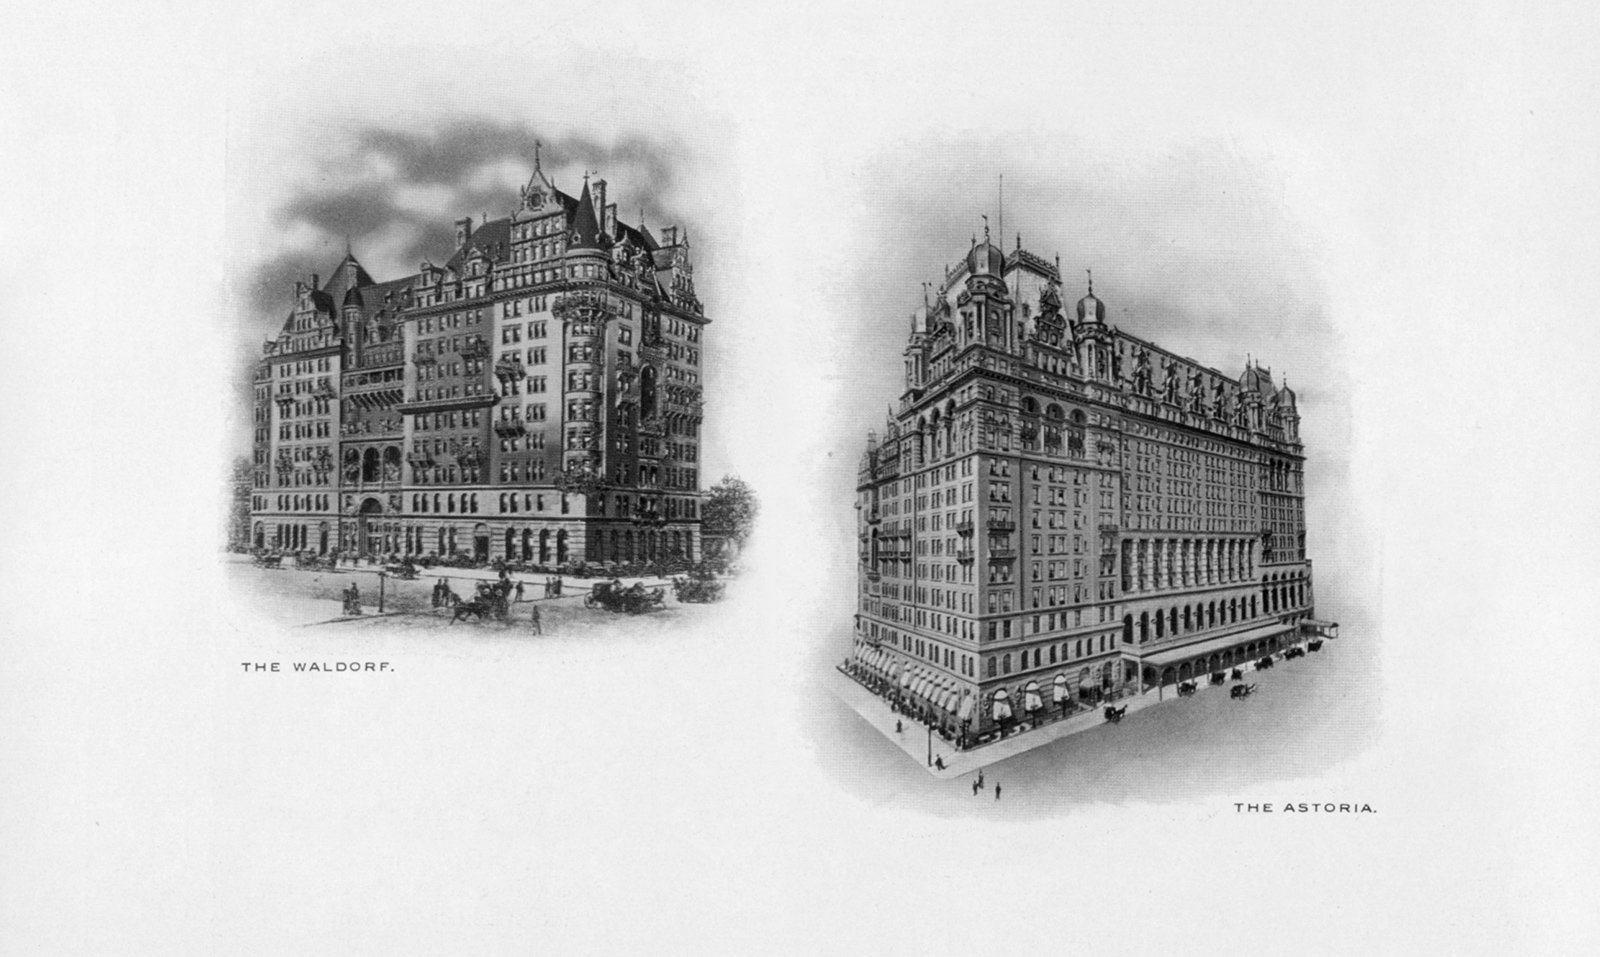 Sketches of The Waldorf and The Astoria Hotels from the Late 1800's